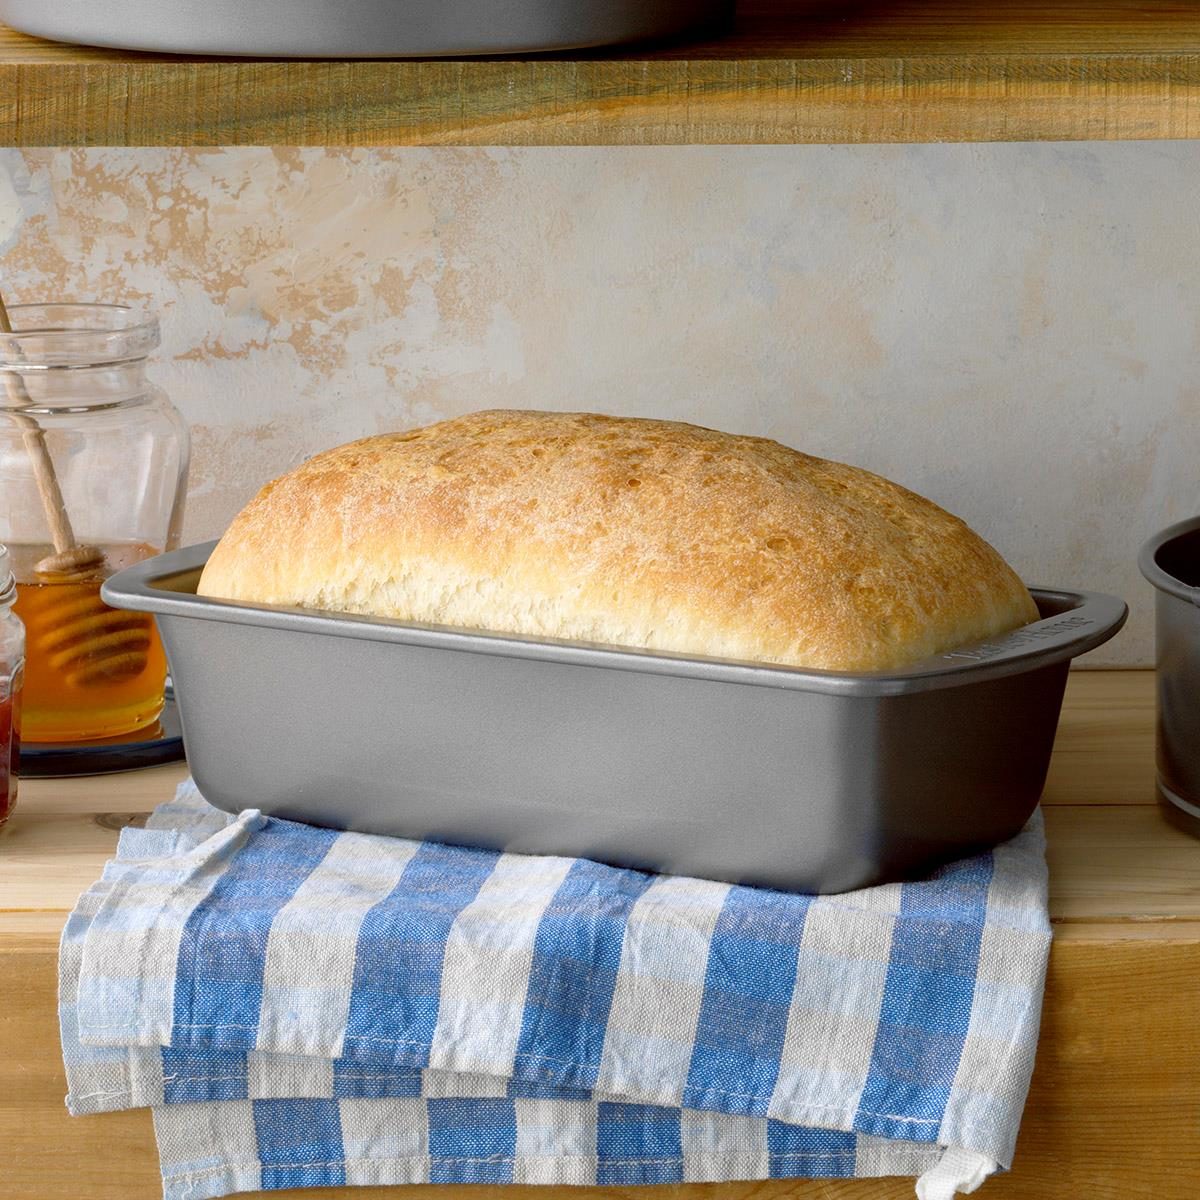 Bread Baking Guide: Tips, Tools and Techniques for How to Bake Bread